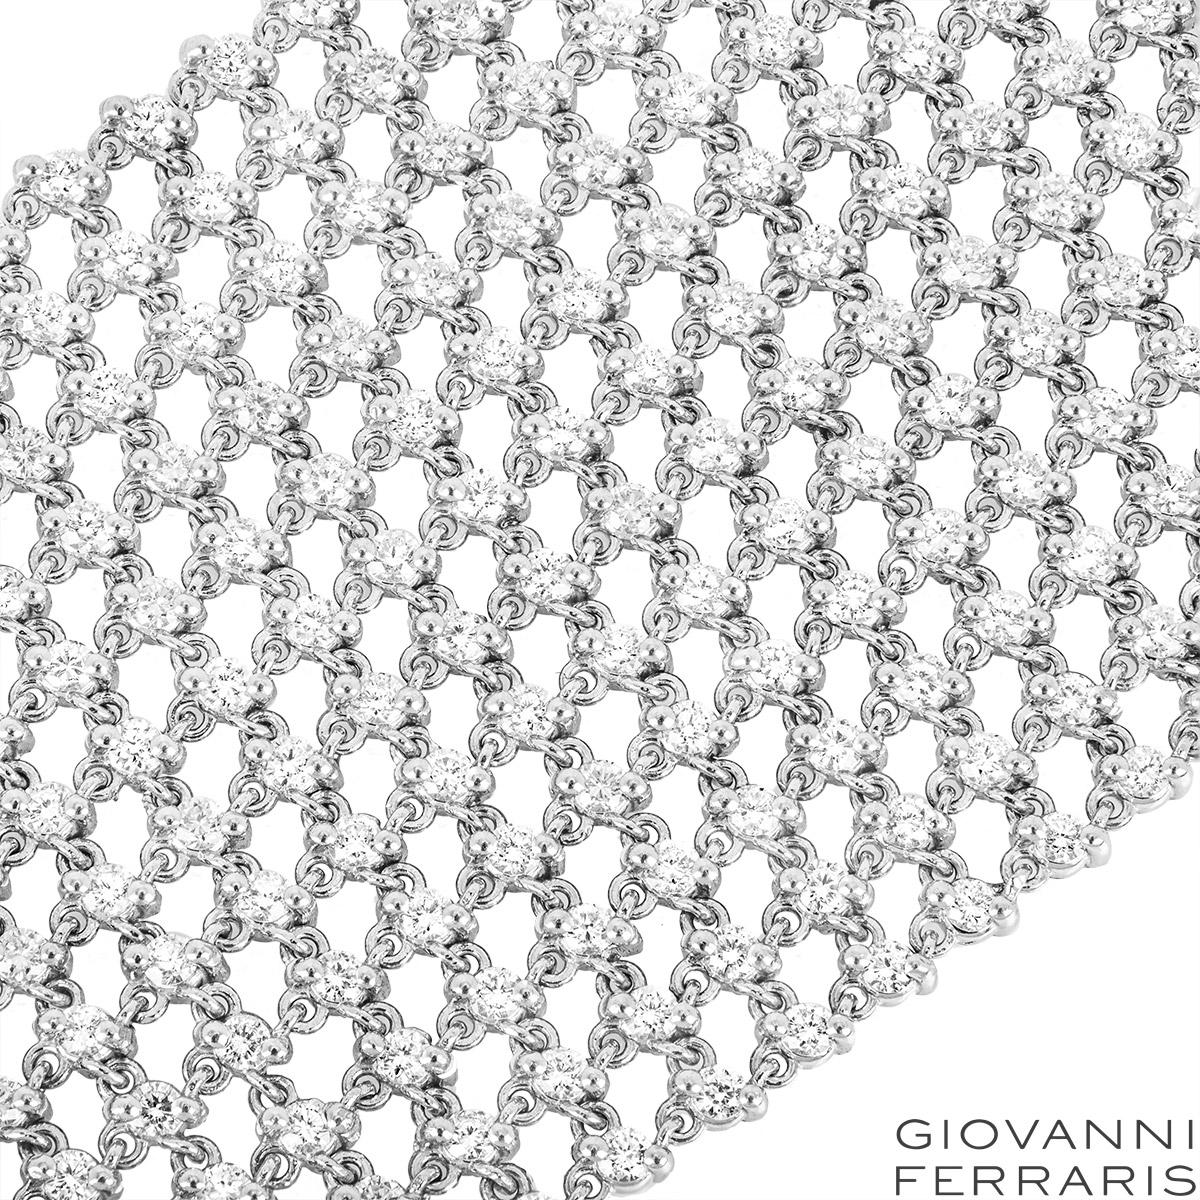 A stunning 18k white gold bracelet by Giovanni Ferraris. The bracelet consists of 12 rows of round brilliant cut diamonds, complemented by a pave set bar clasp. The mesh design bracelet features 648 round brilliant cut diamonds set throughout in a